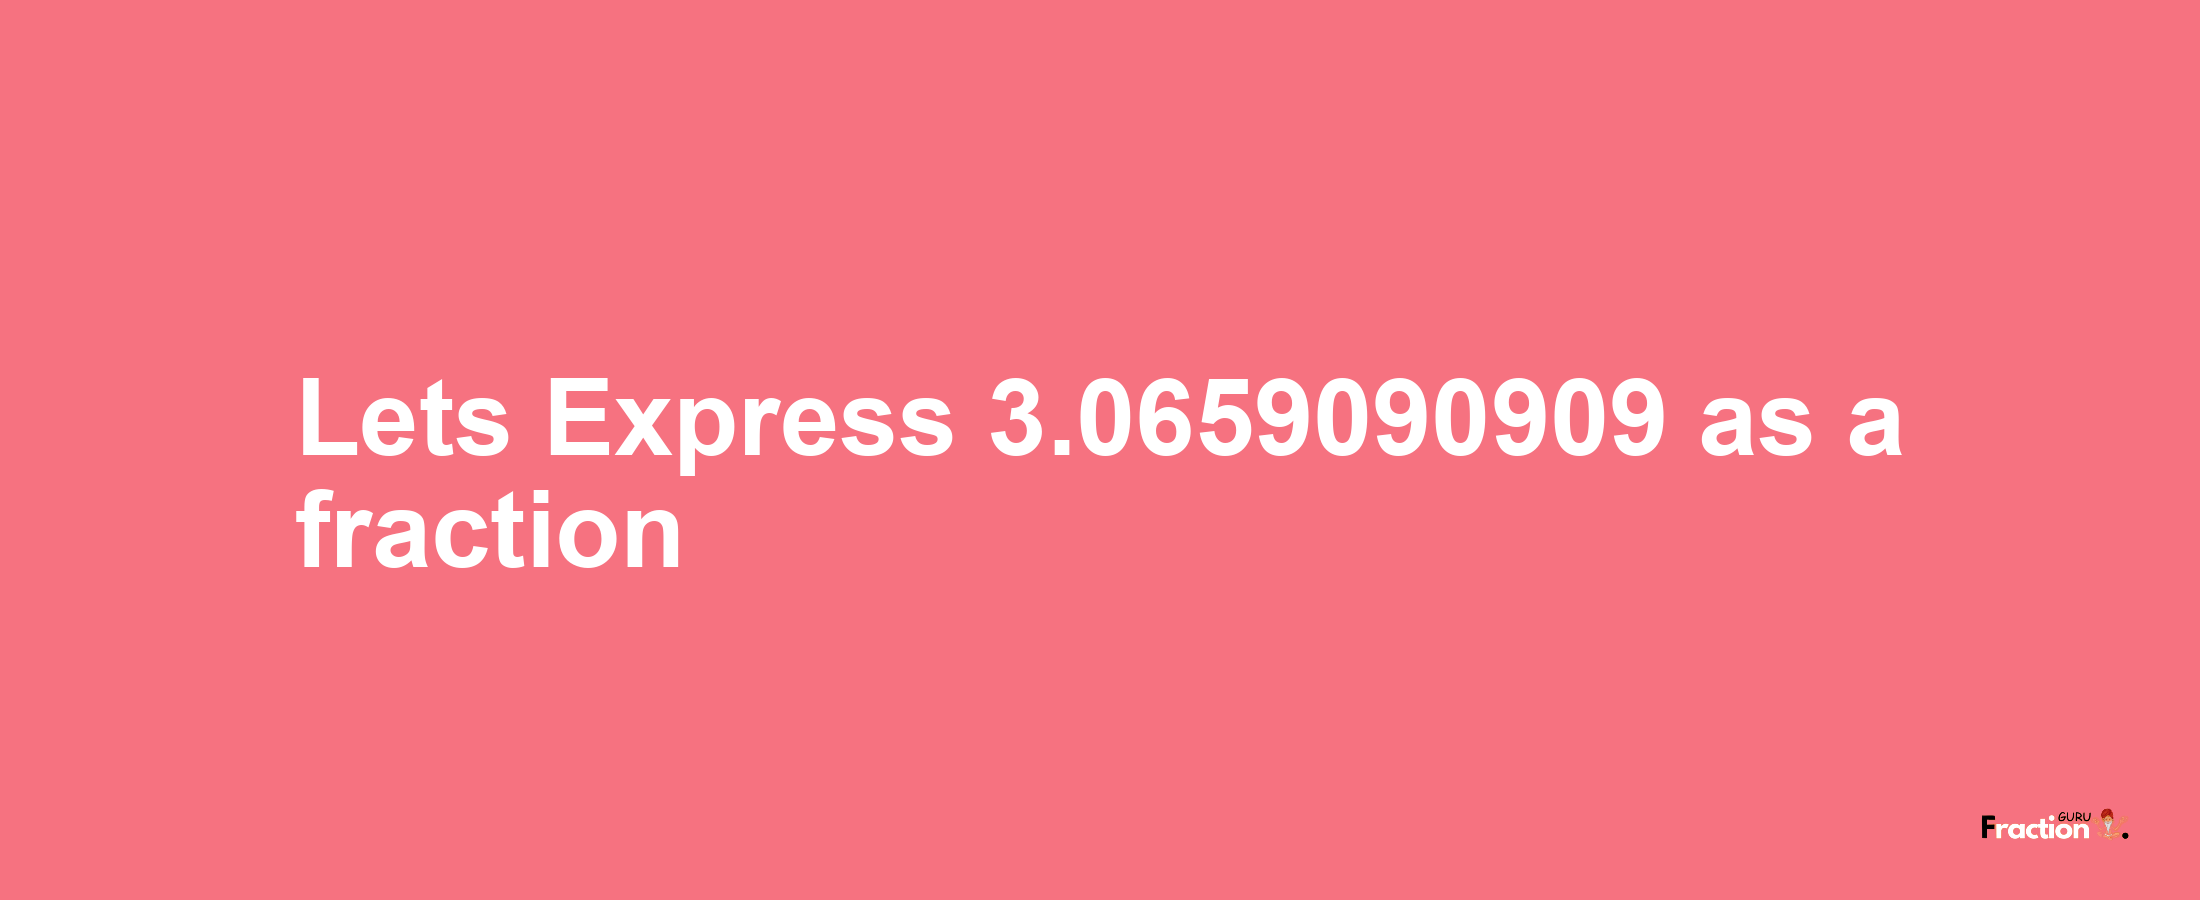 Lets Express 3.0659090909 as afraction